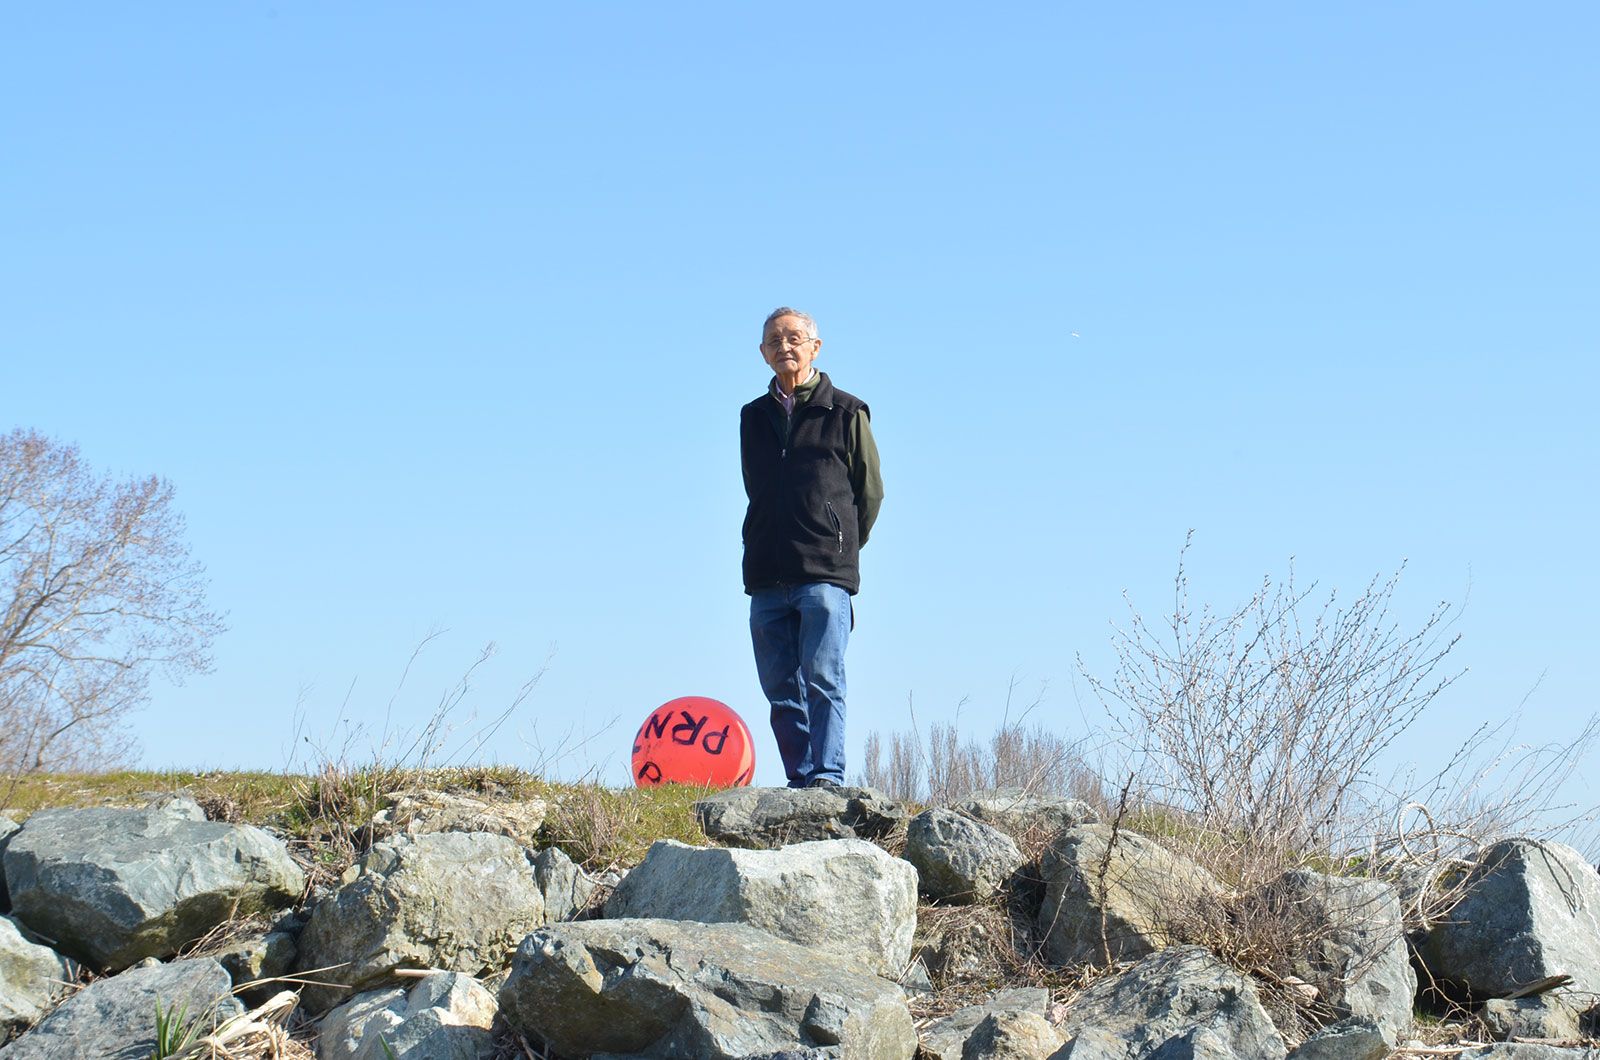 An older man in a black vest and jeans stands on a hill surrounded by rocks, brush and a blue sky.